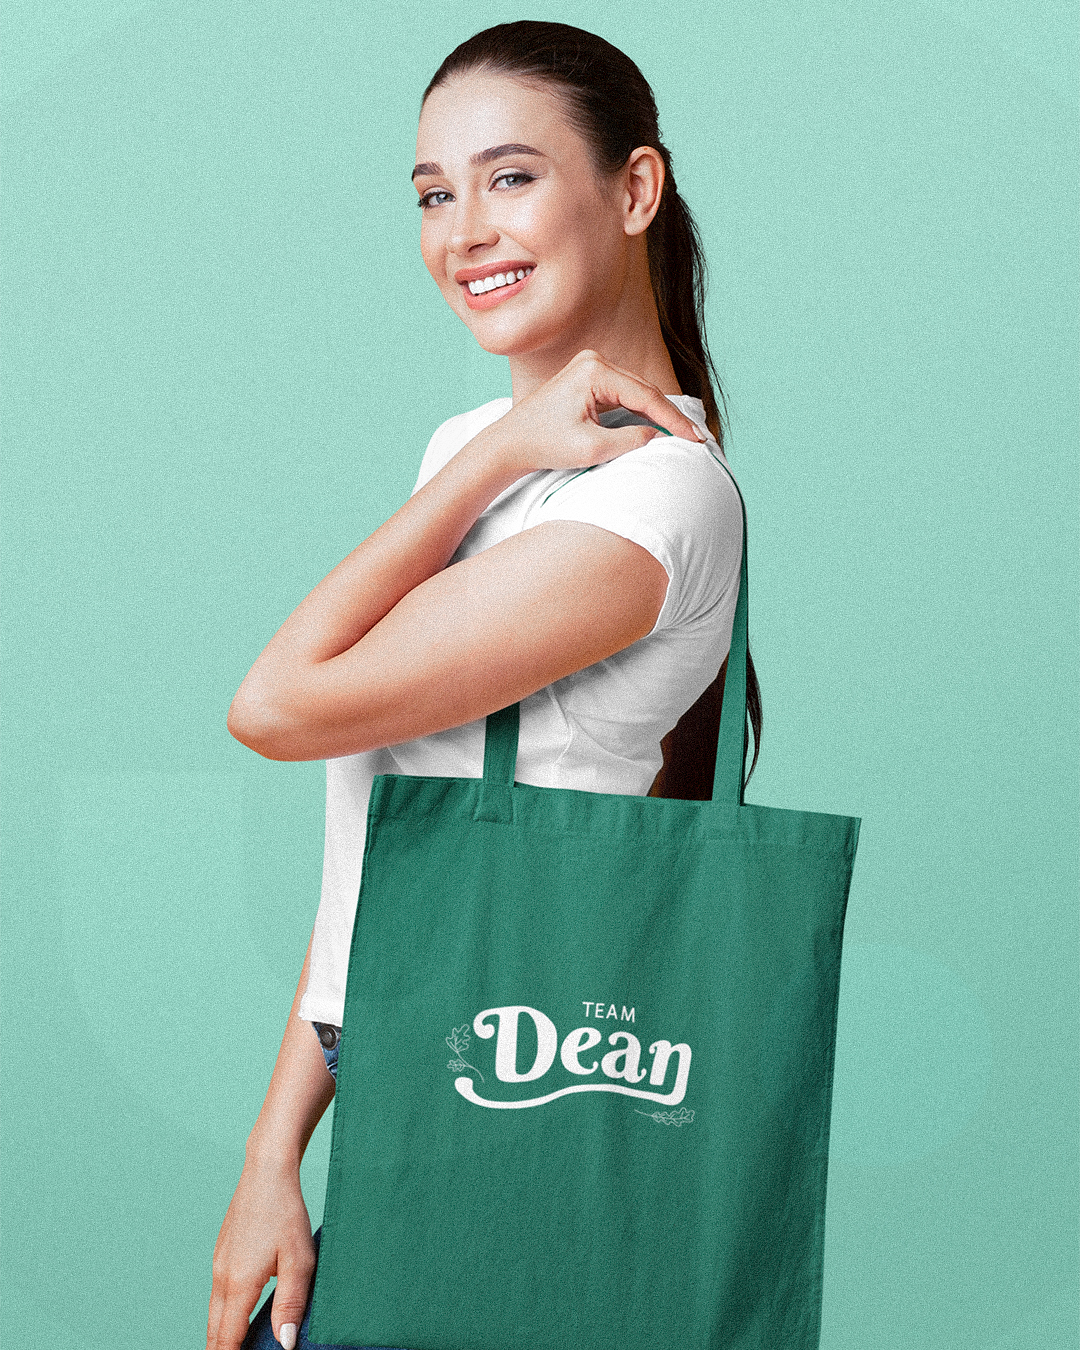 Team Dean Forester Tote Bag - Gilmore Girls Inspired Tote Bag - Rory Gilmore's Boyfriends - Team Dean Forester Gilmore Girls Inspired Tote Bag